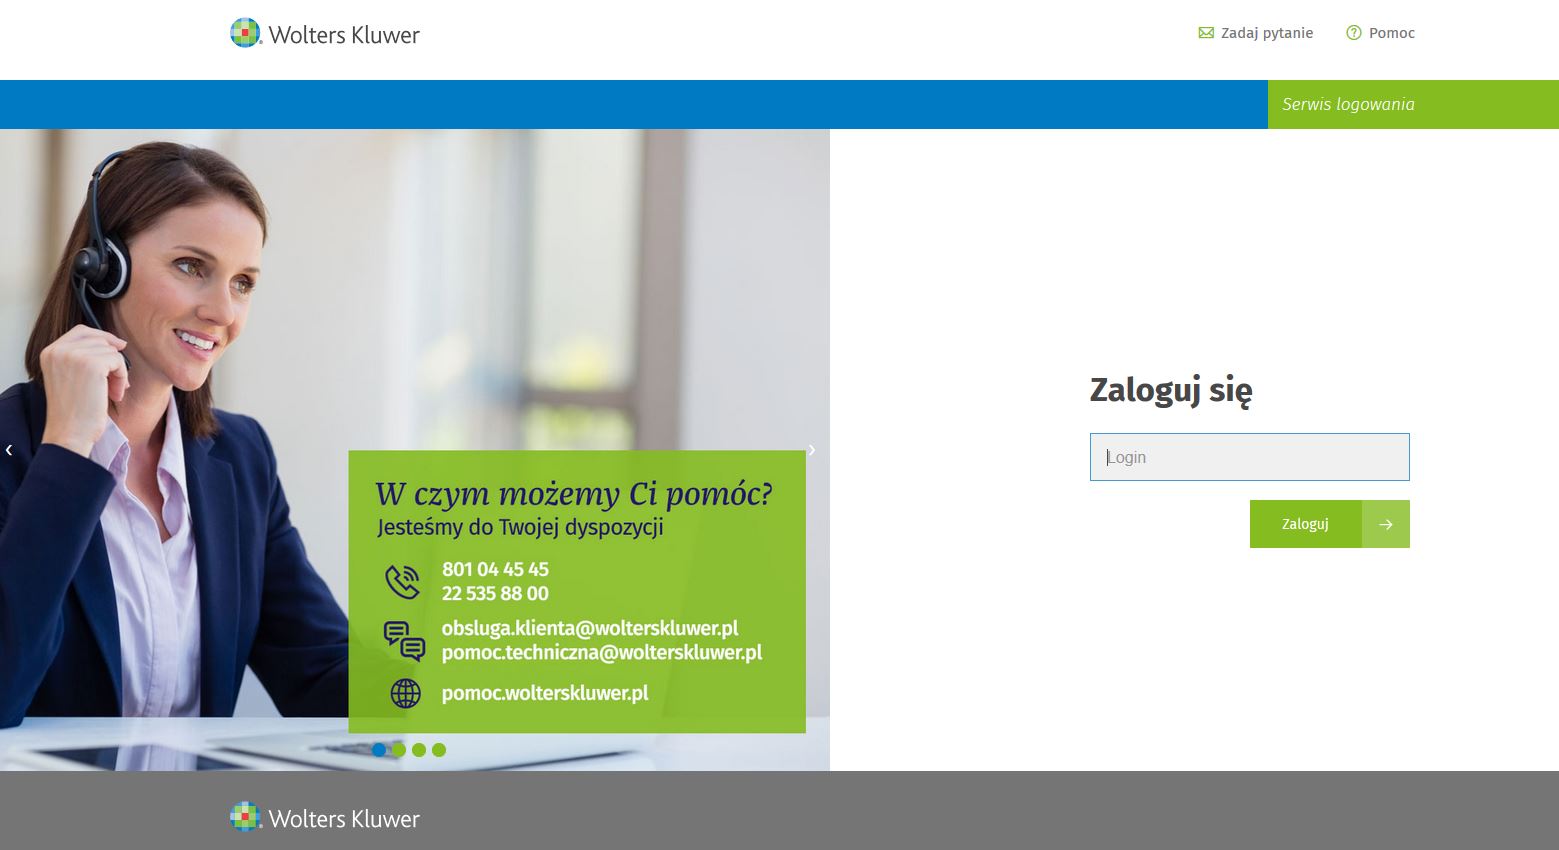 Wolters Kluwer login page